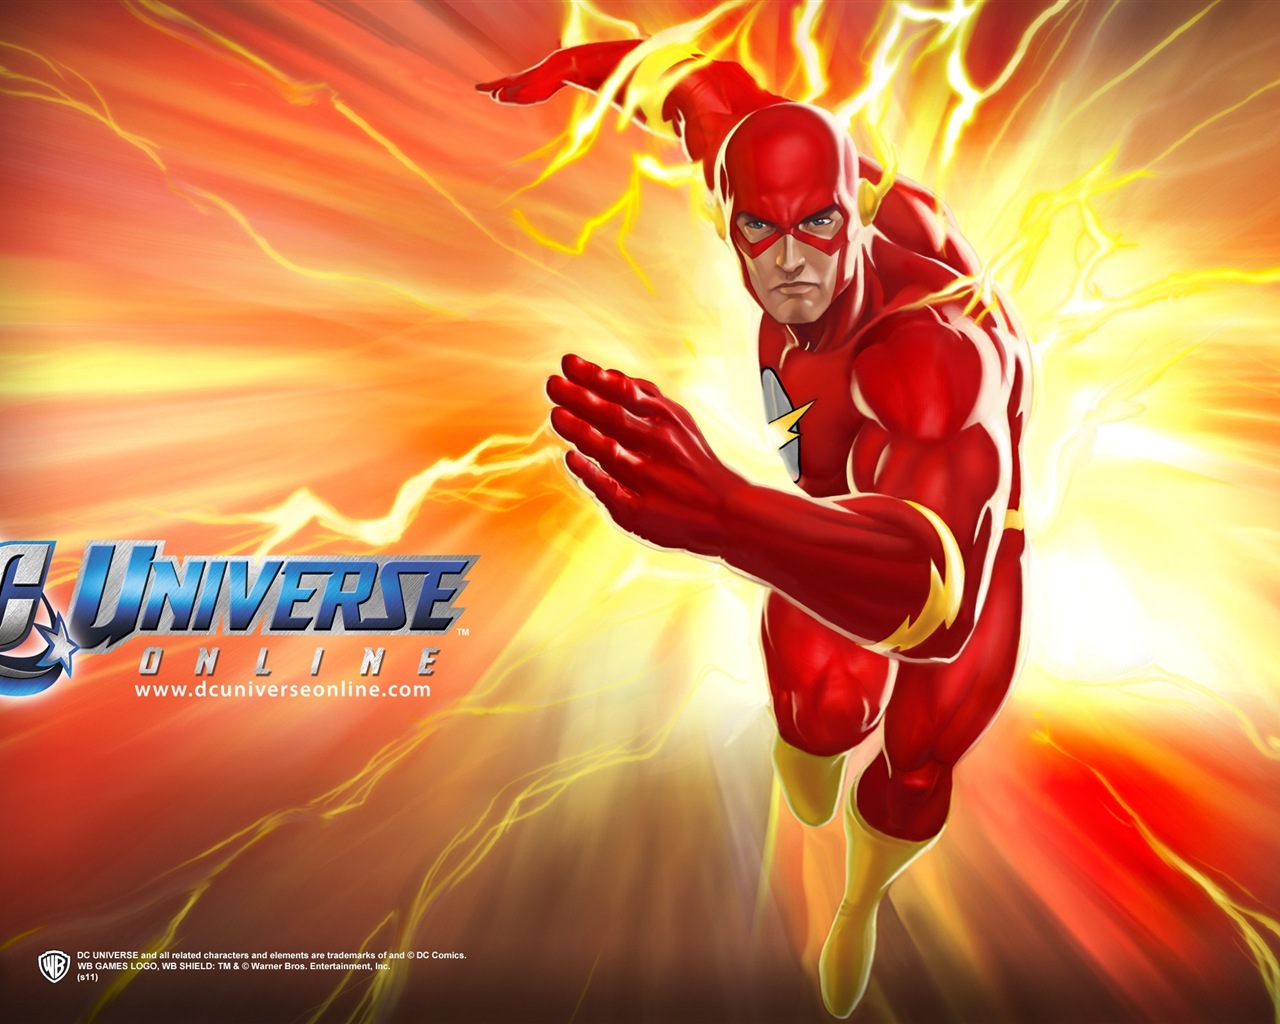 DC Universe Online HD game wallpapers #16 - 1280x1024